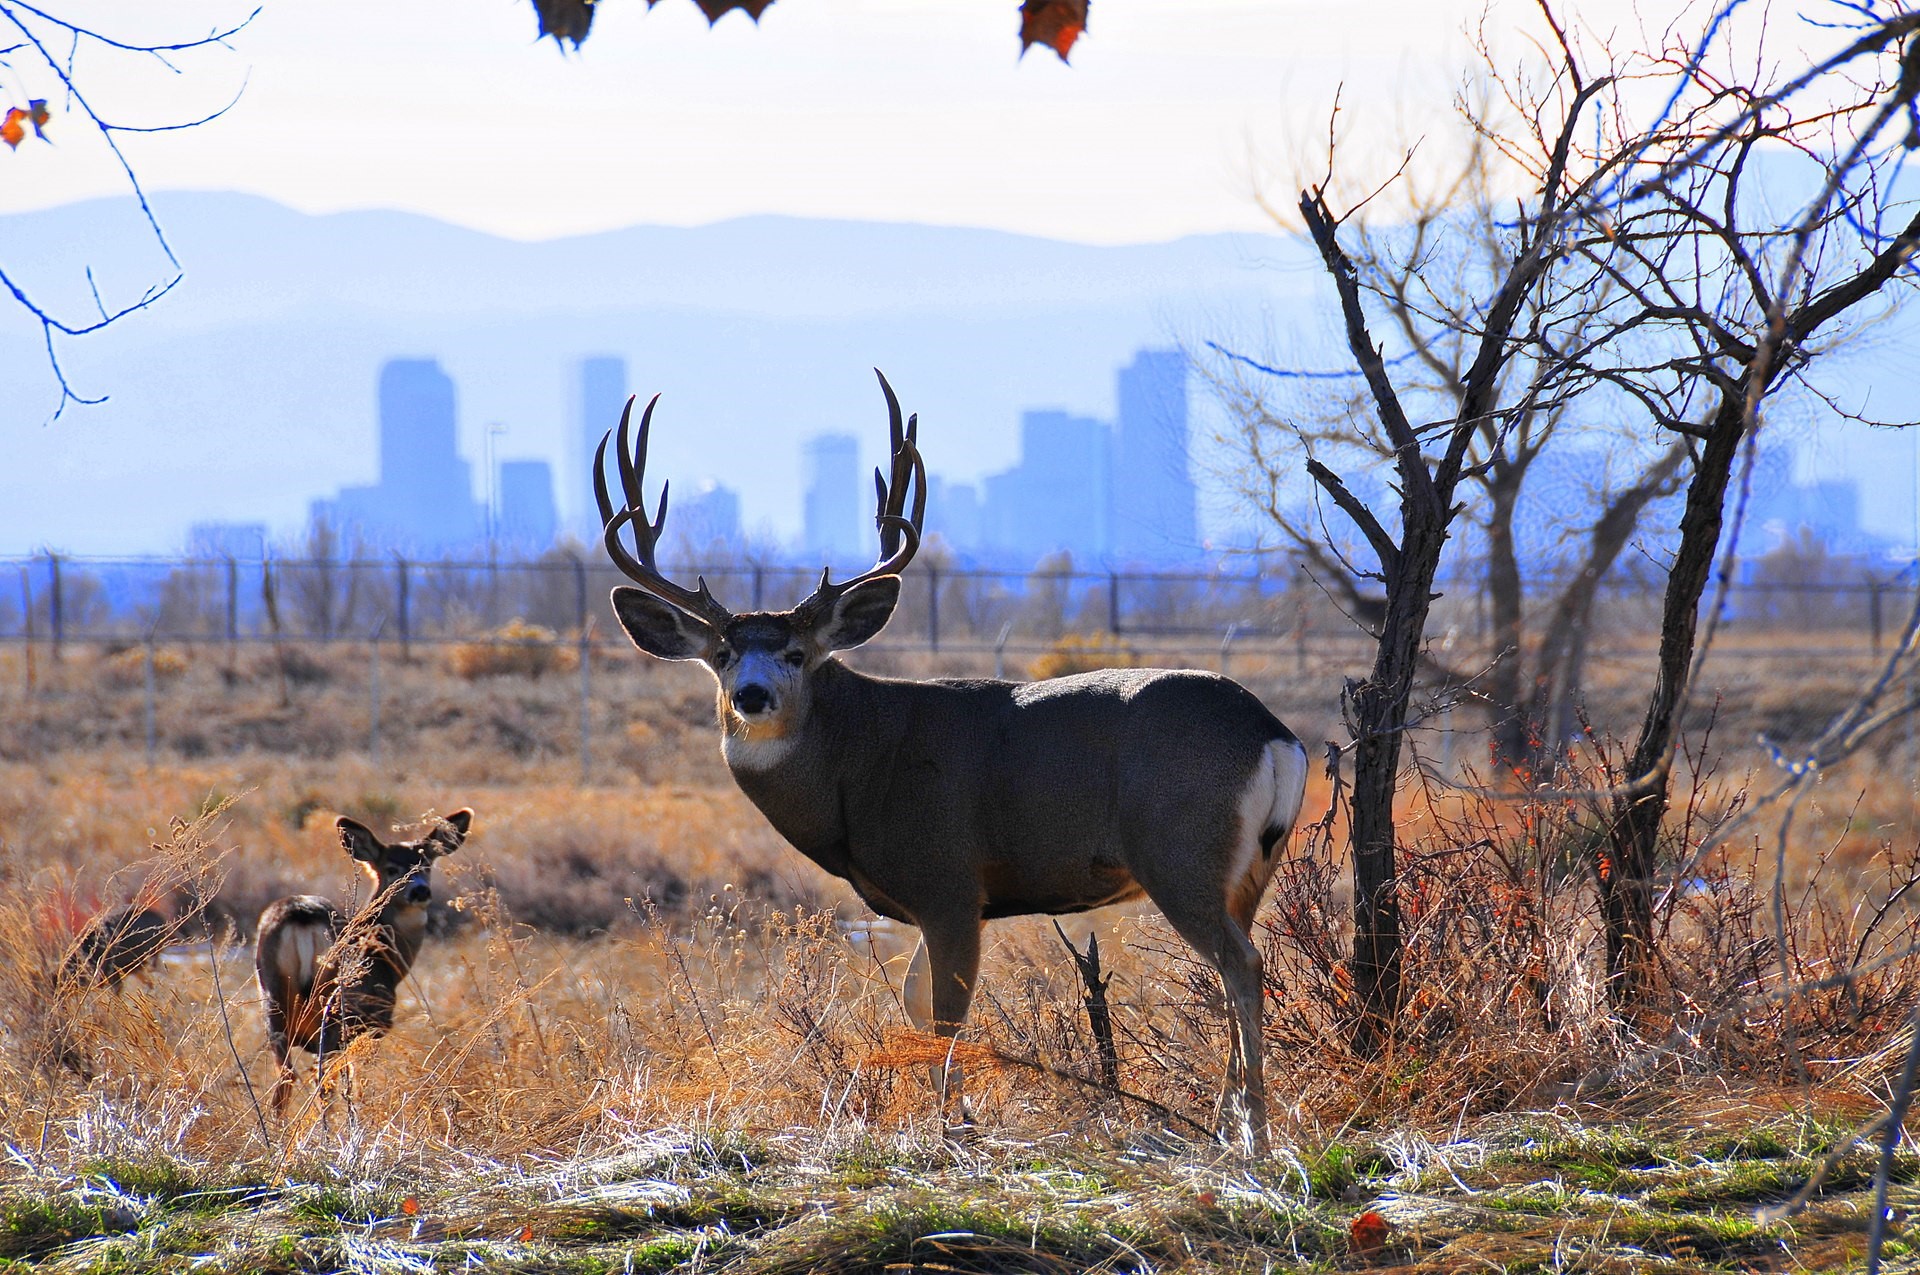 Adult deer and fawn against urban backdrop